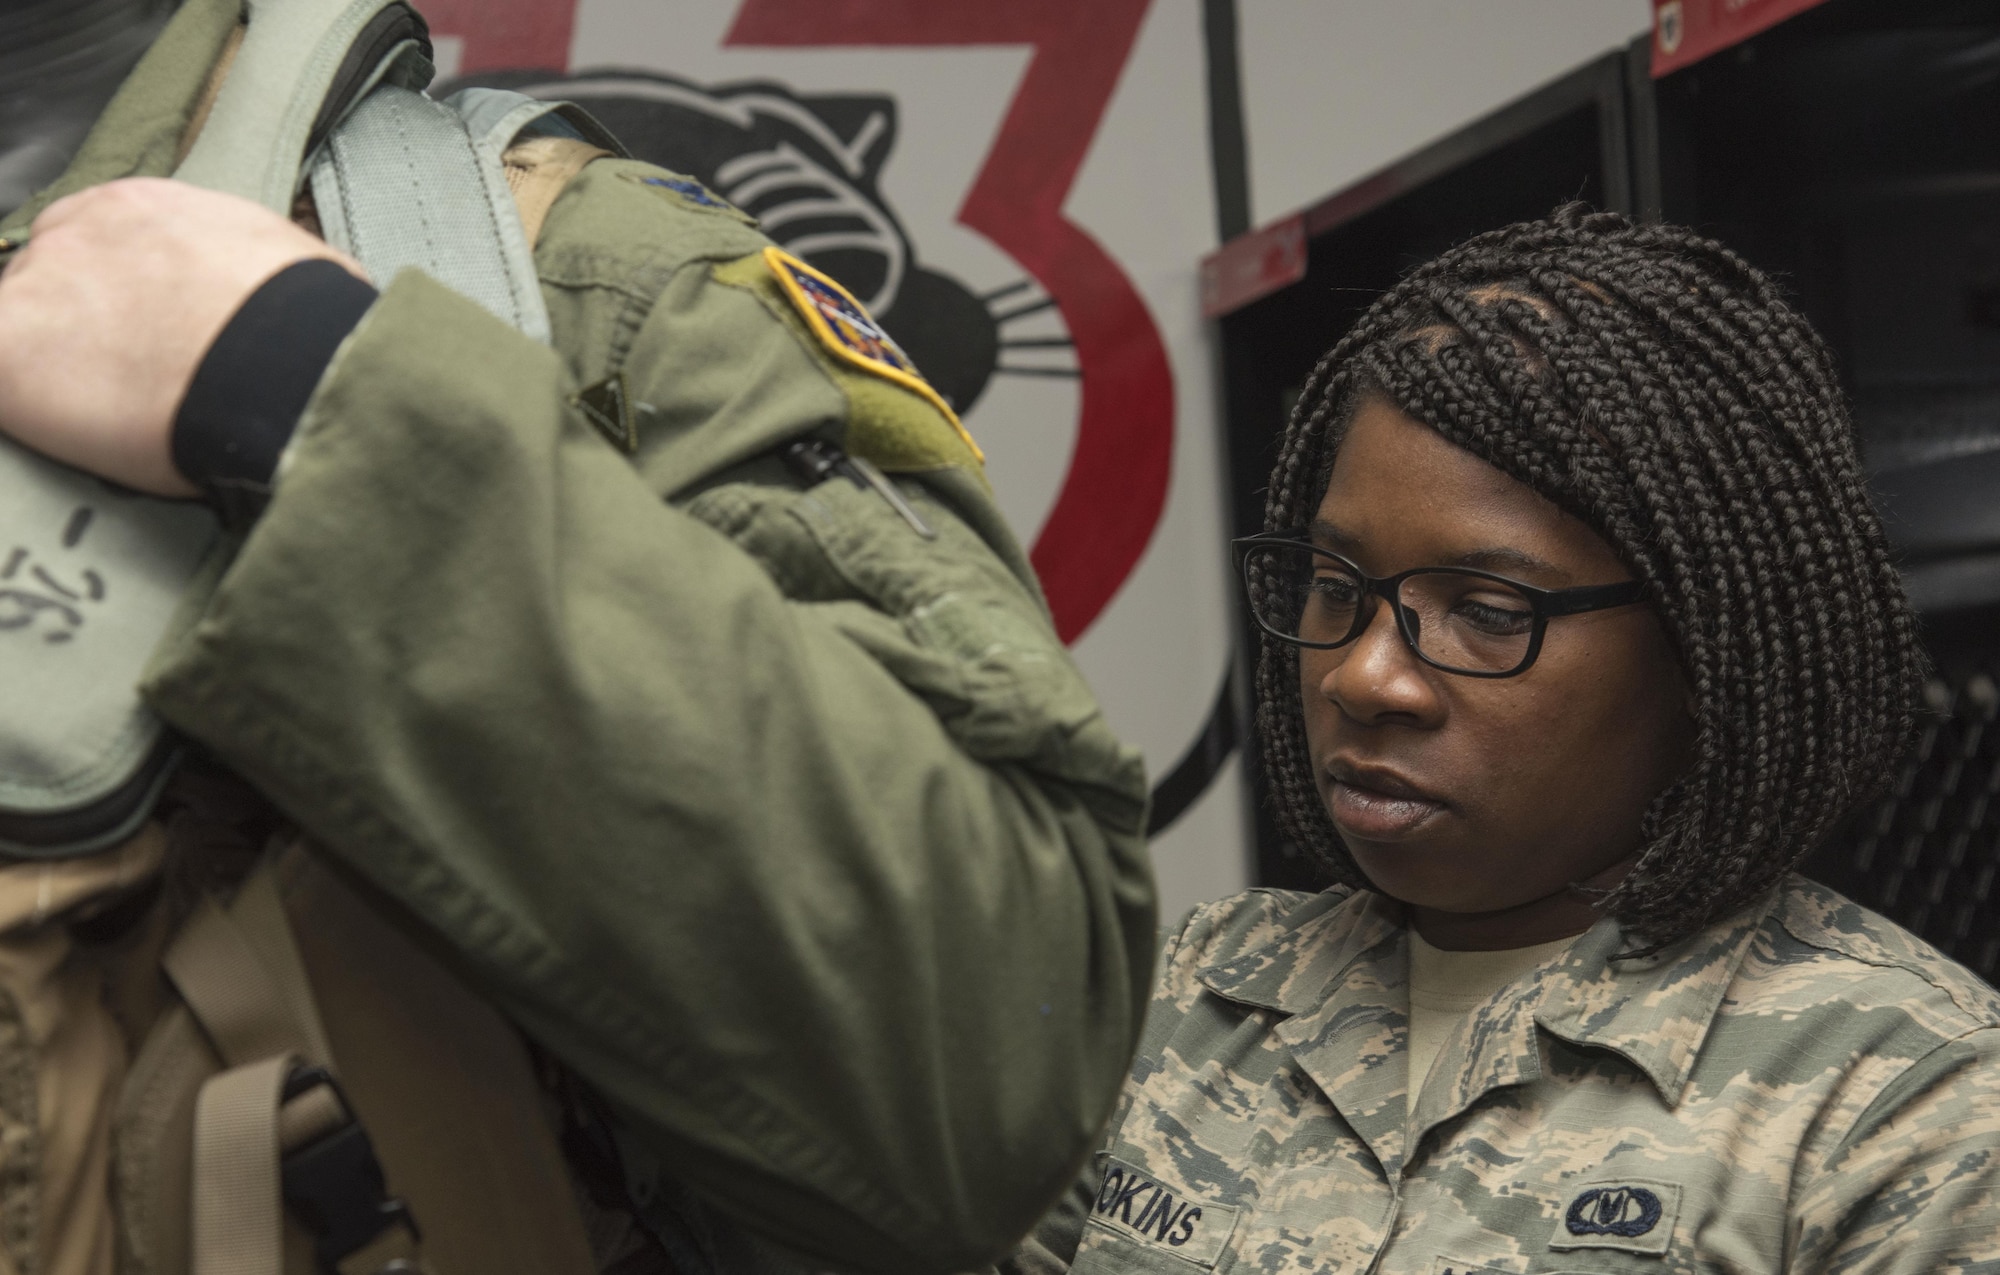 U.S. Air Force Col. Travis Rex, left, the 35th Fighter Wing vice commander, receives a pre-flight inspection by Staff Sgt. Faitha Brookings, right, the 35th Operations Support Squadron aircrew flight equipment NCO in charge, at Misawa Air Base, Japan, Feb. 8, 2017. After donning flight equipment, AFE personnel jolt and tug their suits ensuring survival amenities are secured and no tears or holes formed in their uniform. (U.S. Air Force photo by Airman 1st Class Sadie Colbert)